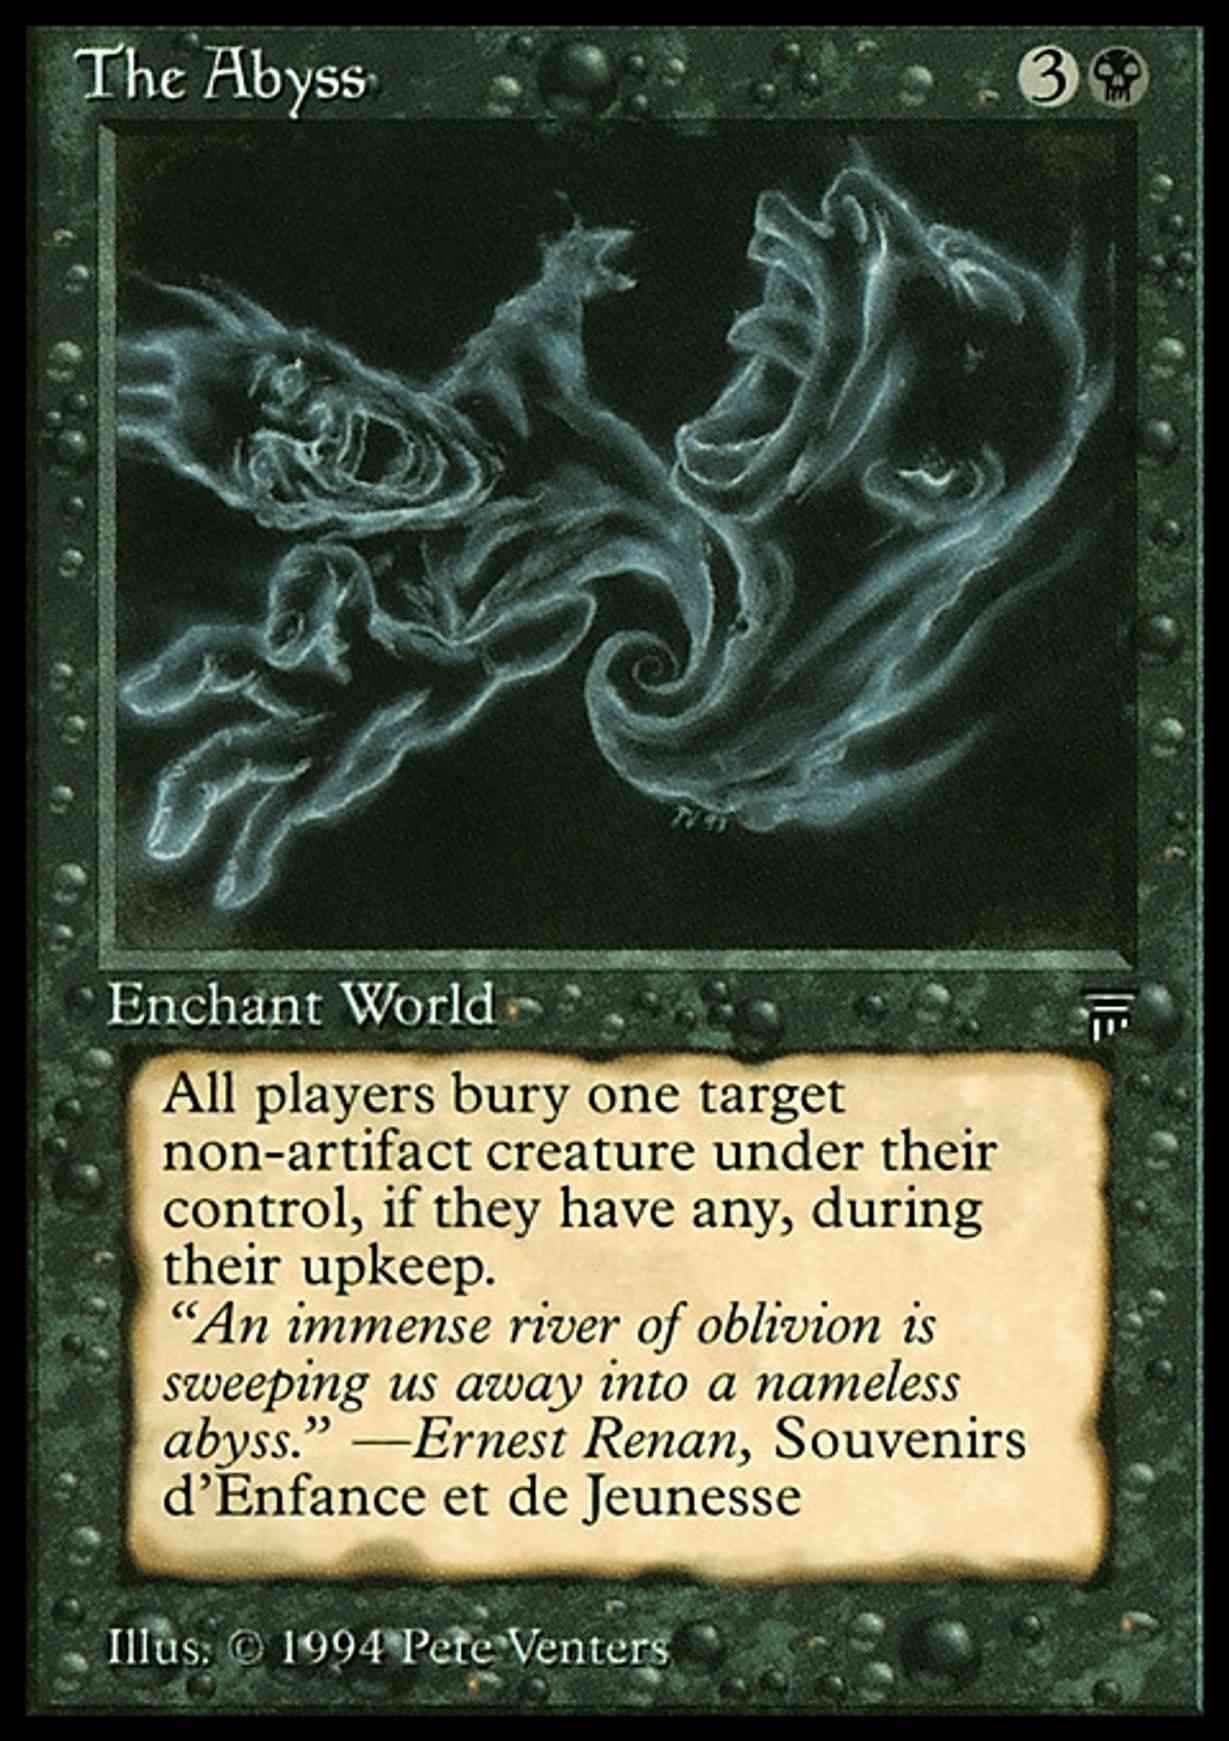 The Abyss magic card front